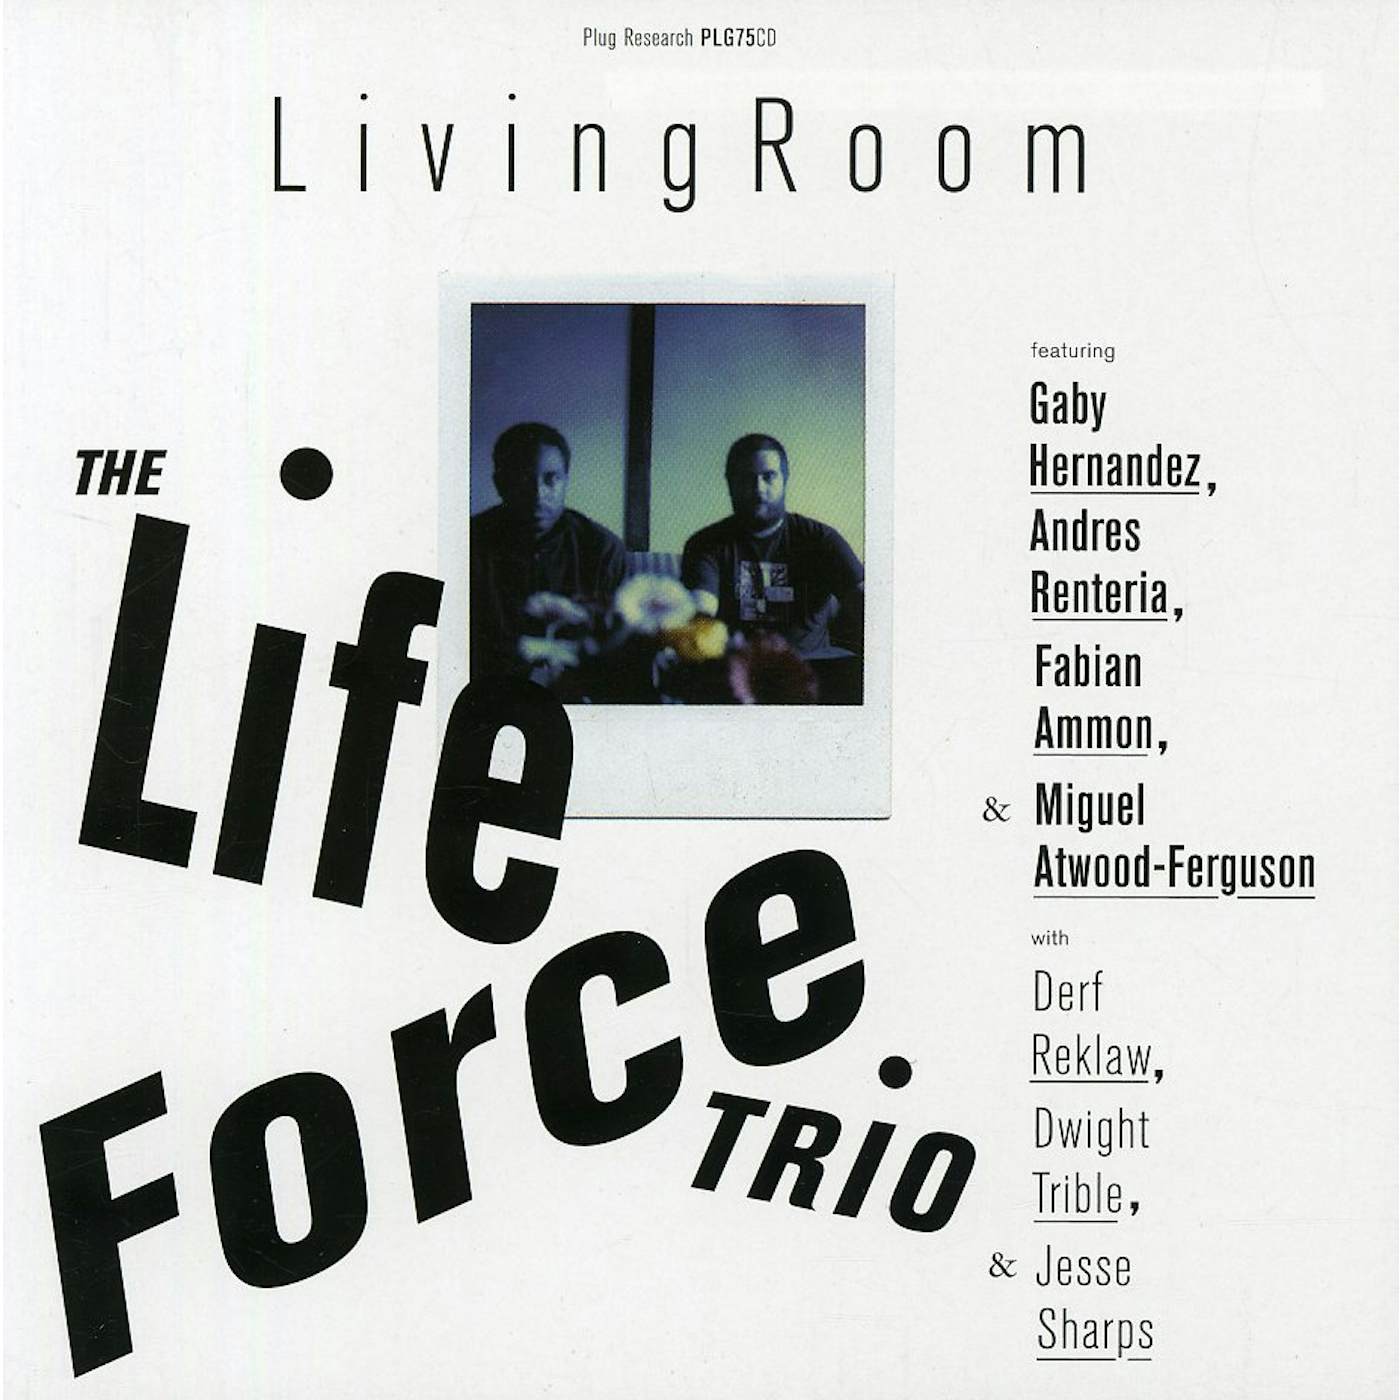 The Life Force Trio LIVING ROOM CD